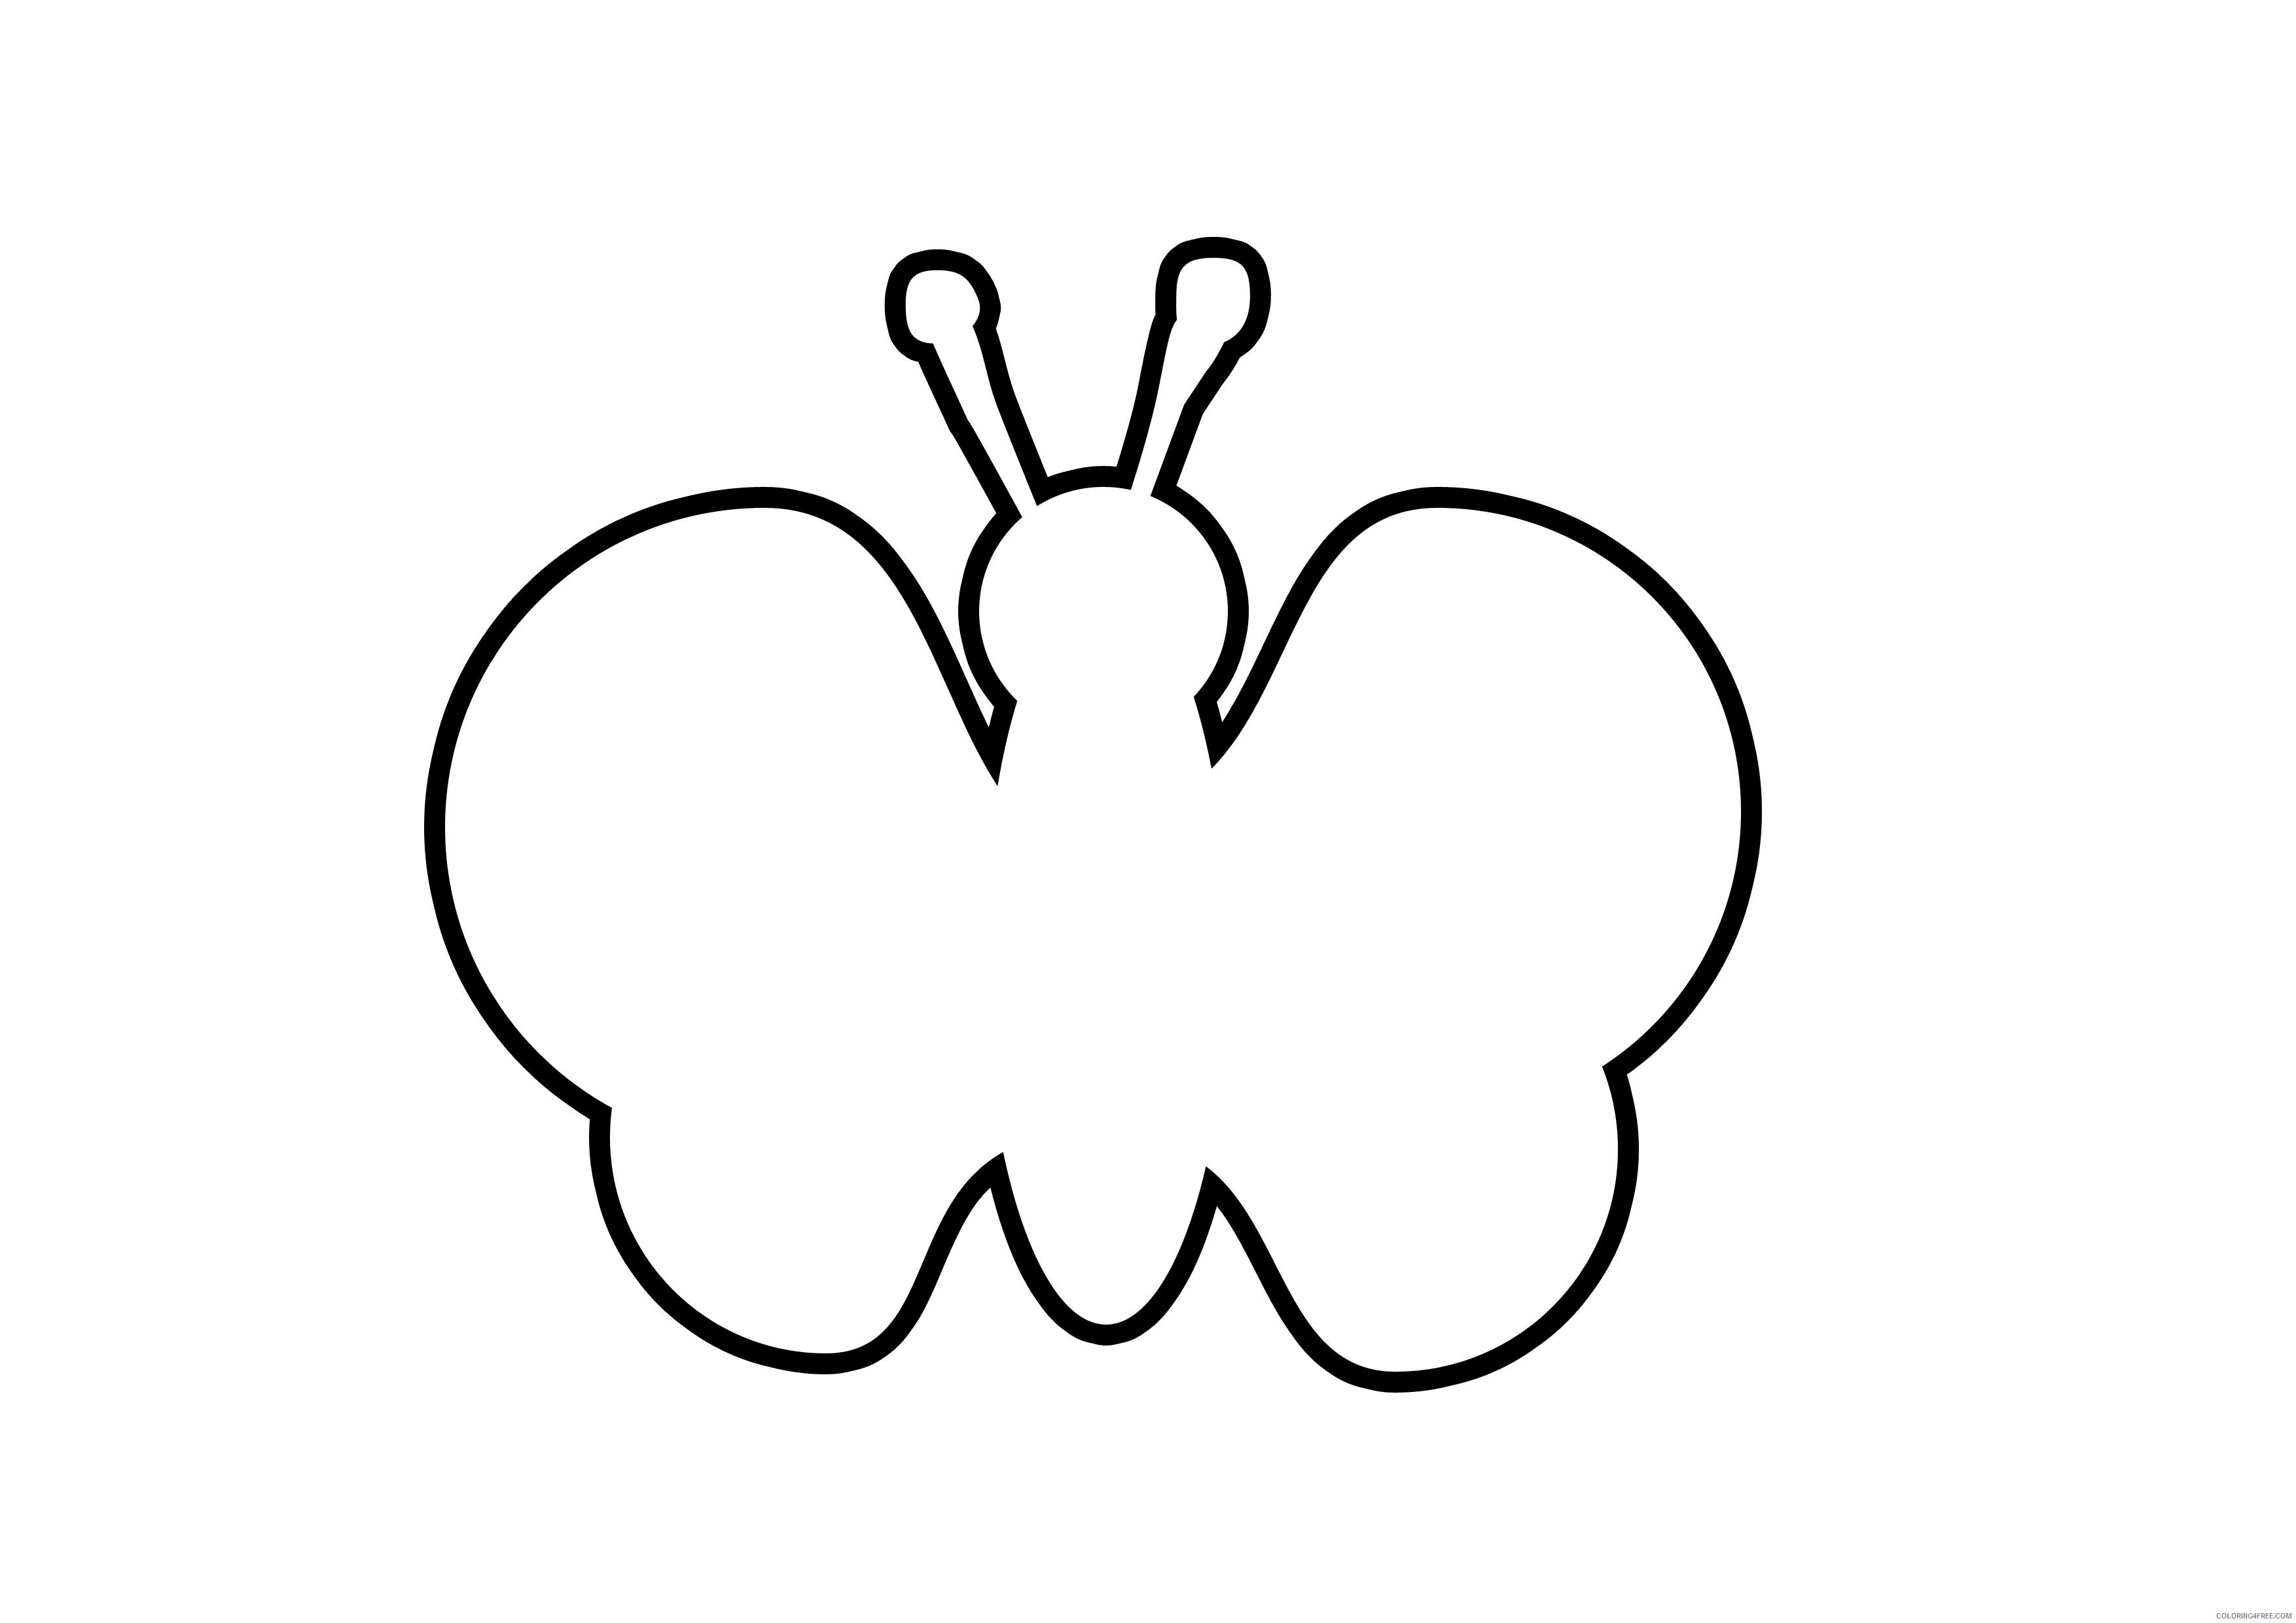 Butterfly Outline Coloring Pages butterfly outline for colouring in Printable Coloring4free